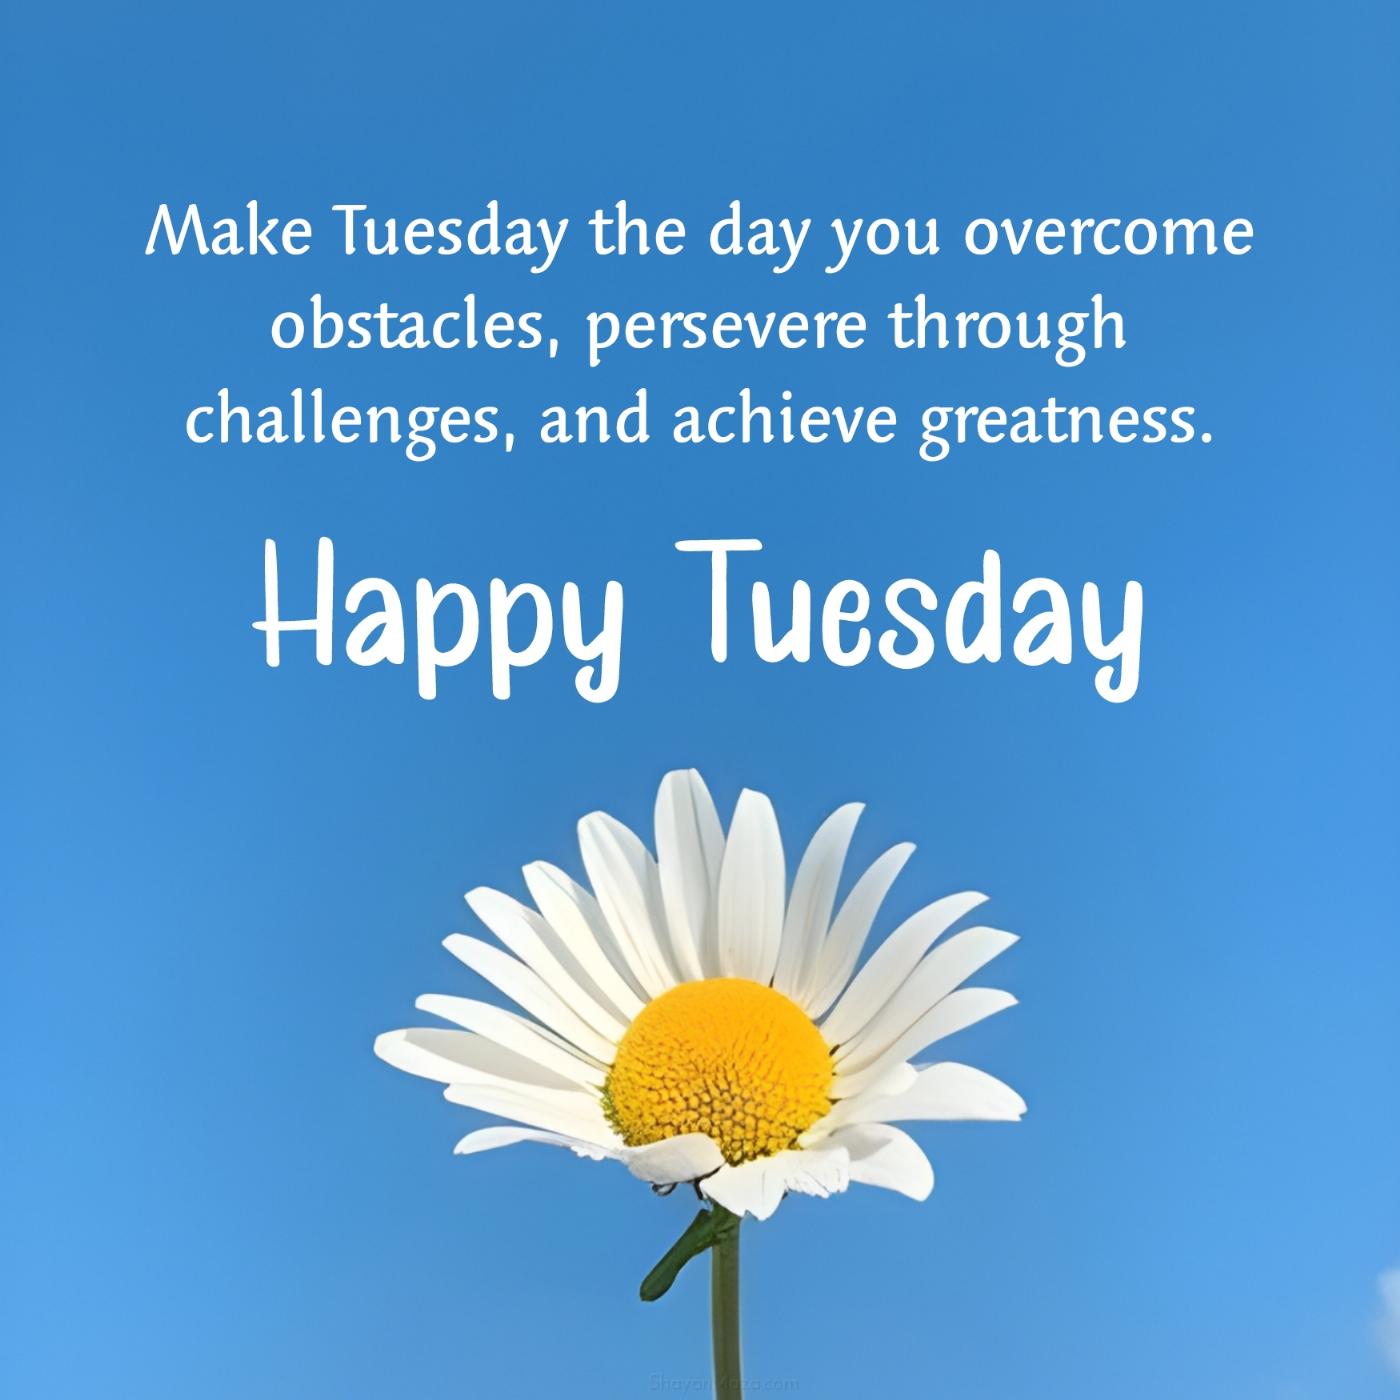 Make Tuesday the day you overcome obstacles persevere through challenges